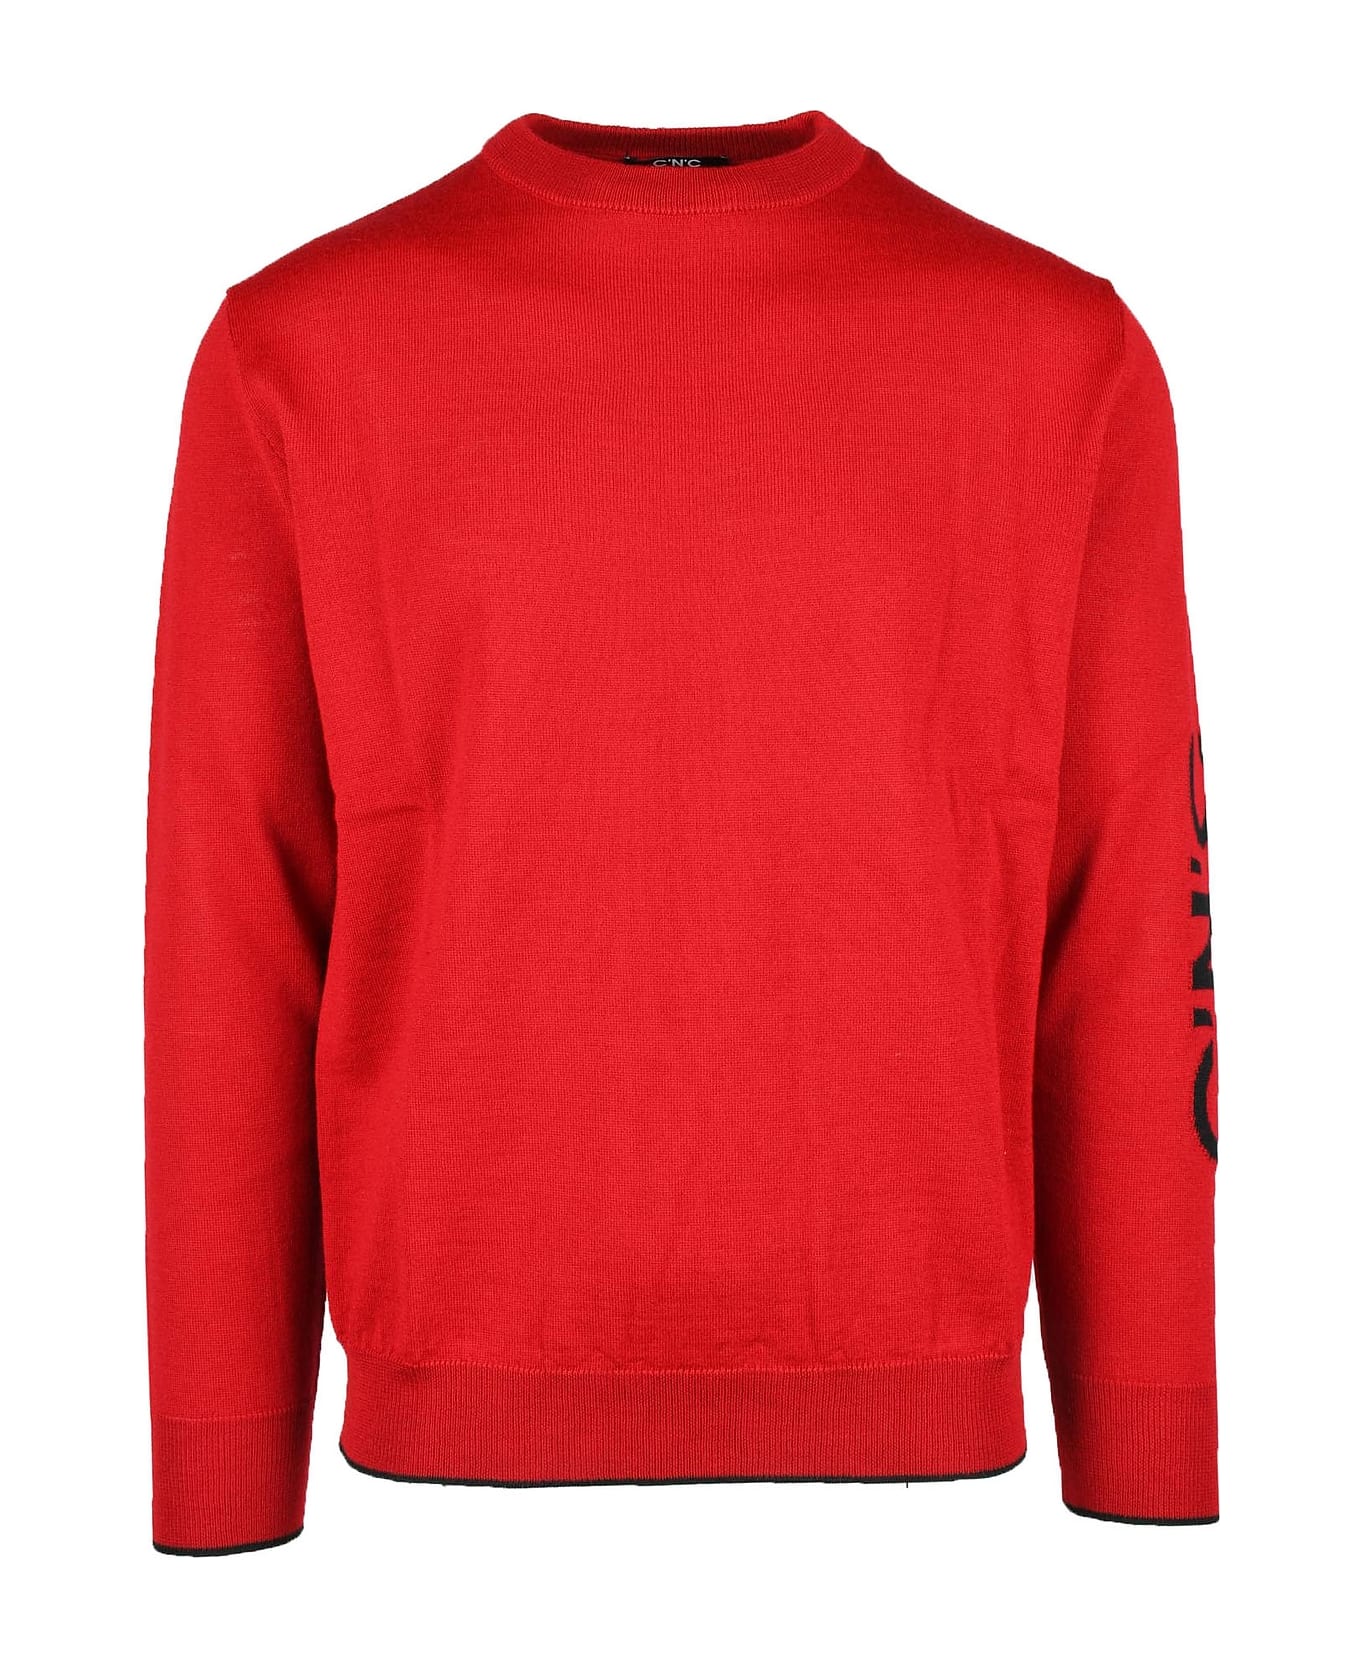 CoSTUME NATIONAL CONTEMPORARY Men's Red Sweater - Red